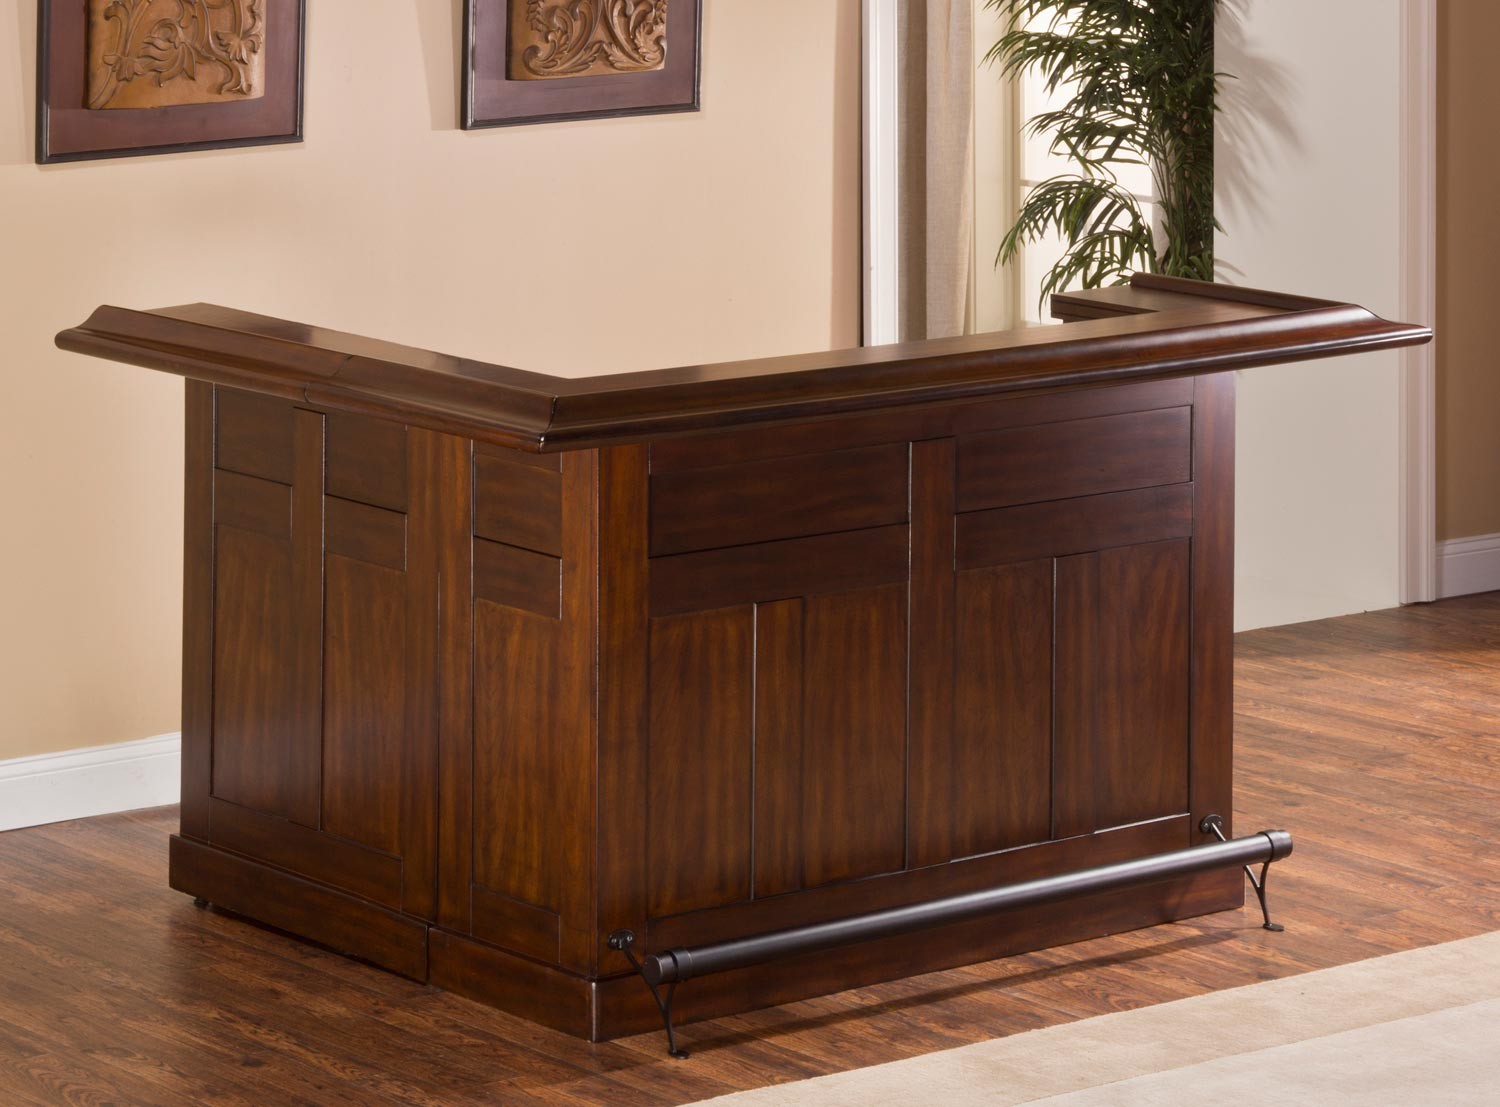 Hillsdale Classic Large Brown Cherry Bar with Side Bar - Brown Cherry